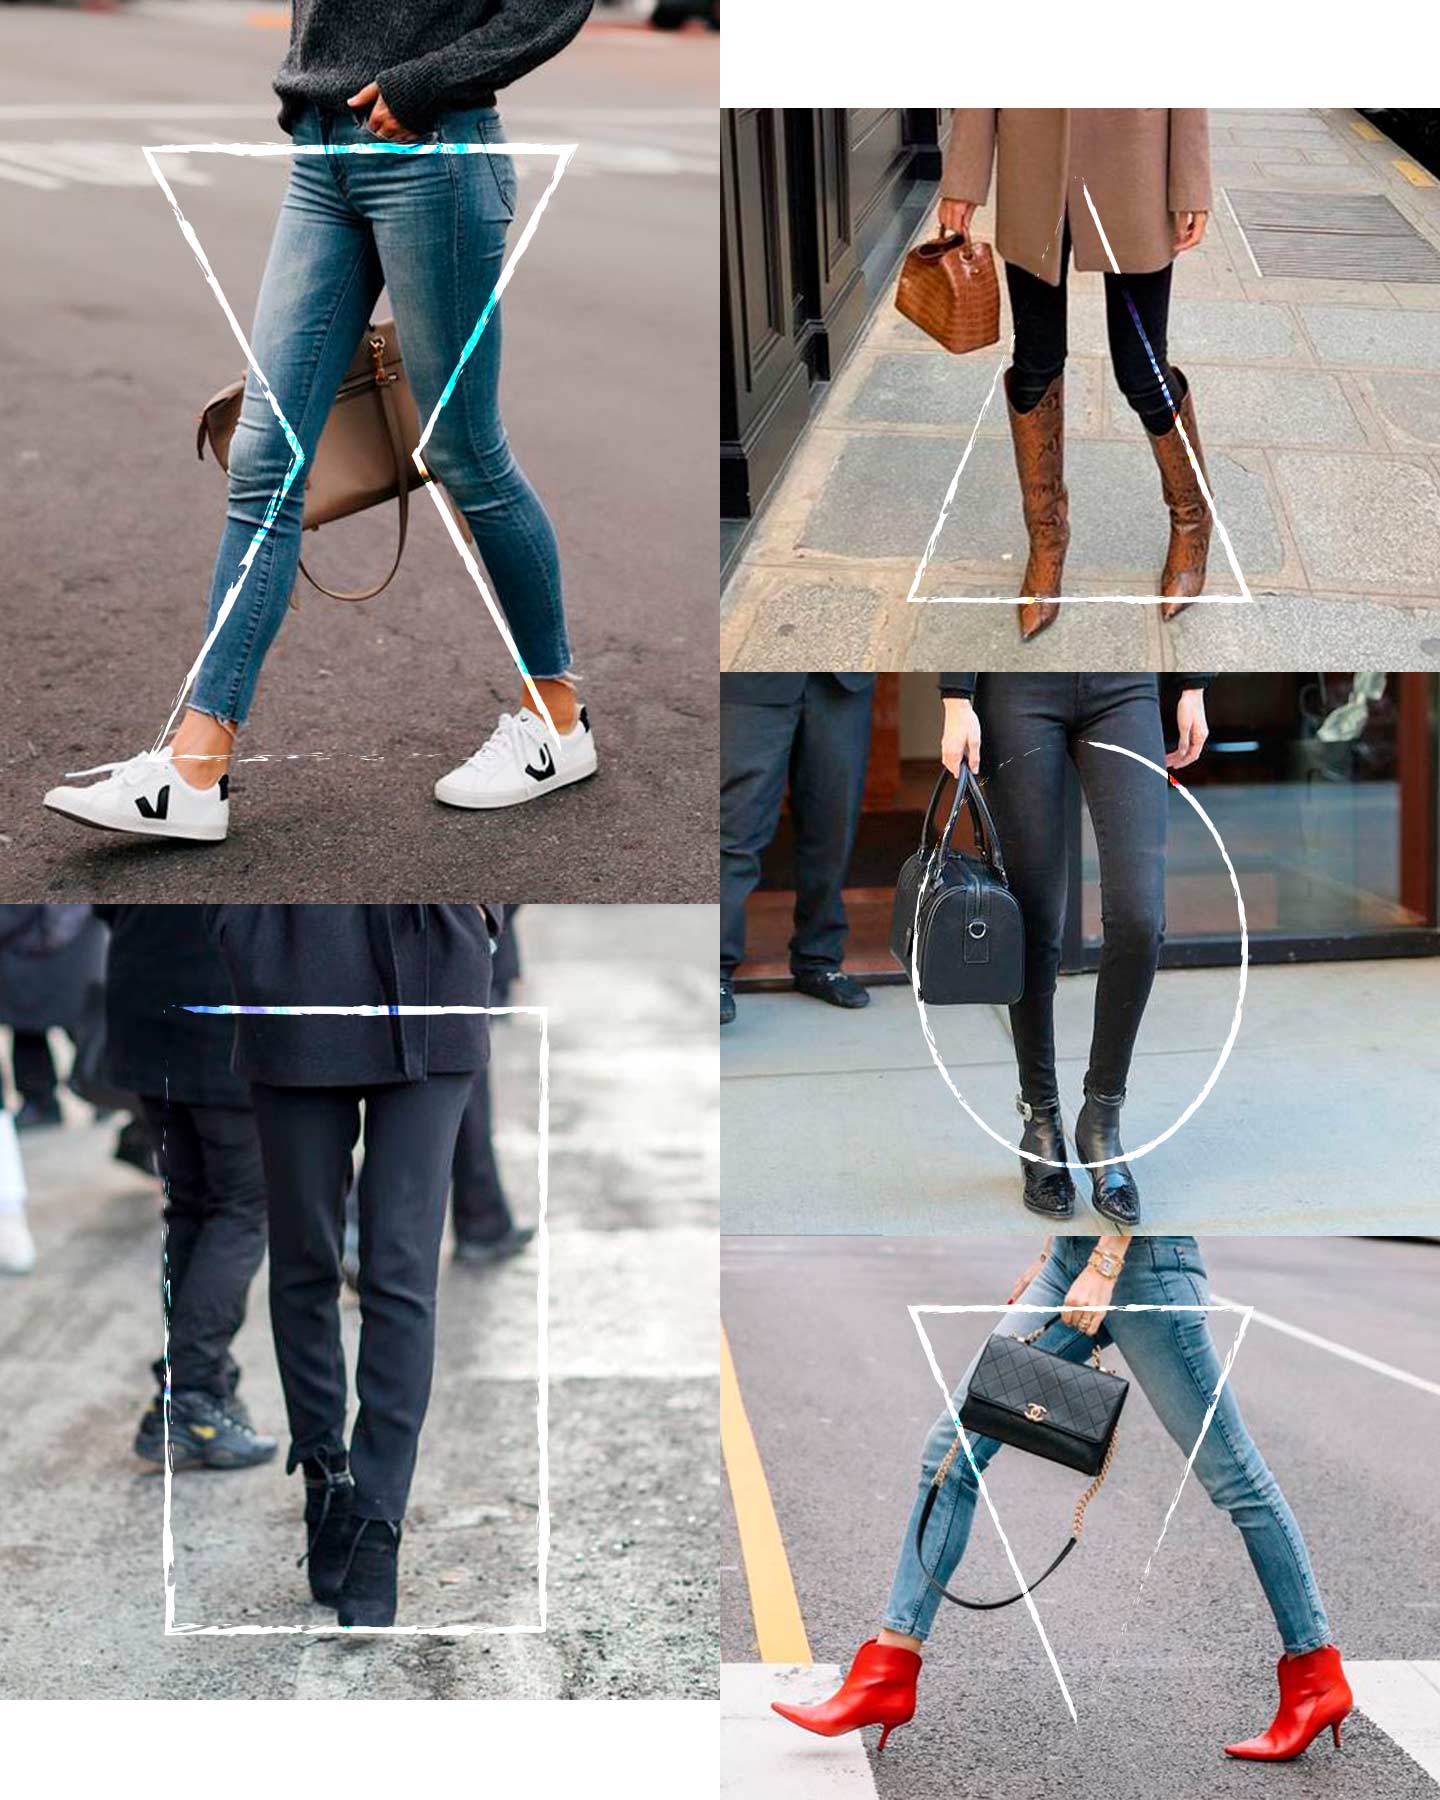 Skinny Jeans vs Baggy Pants: Which Style Would Suit Your Body